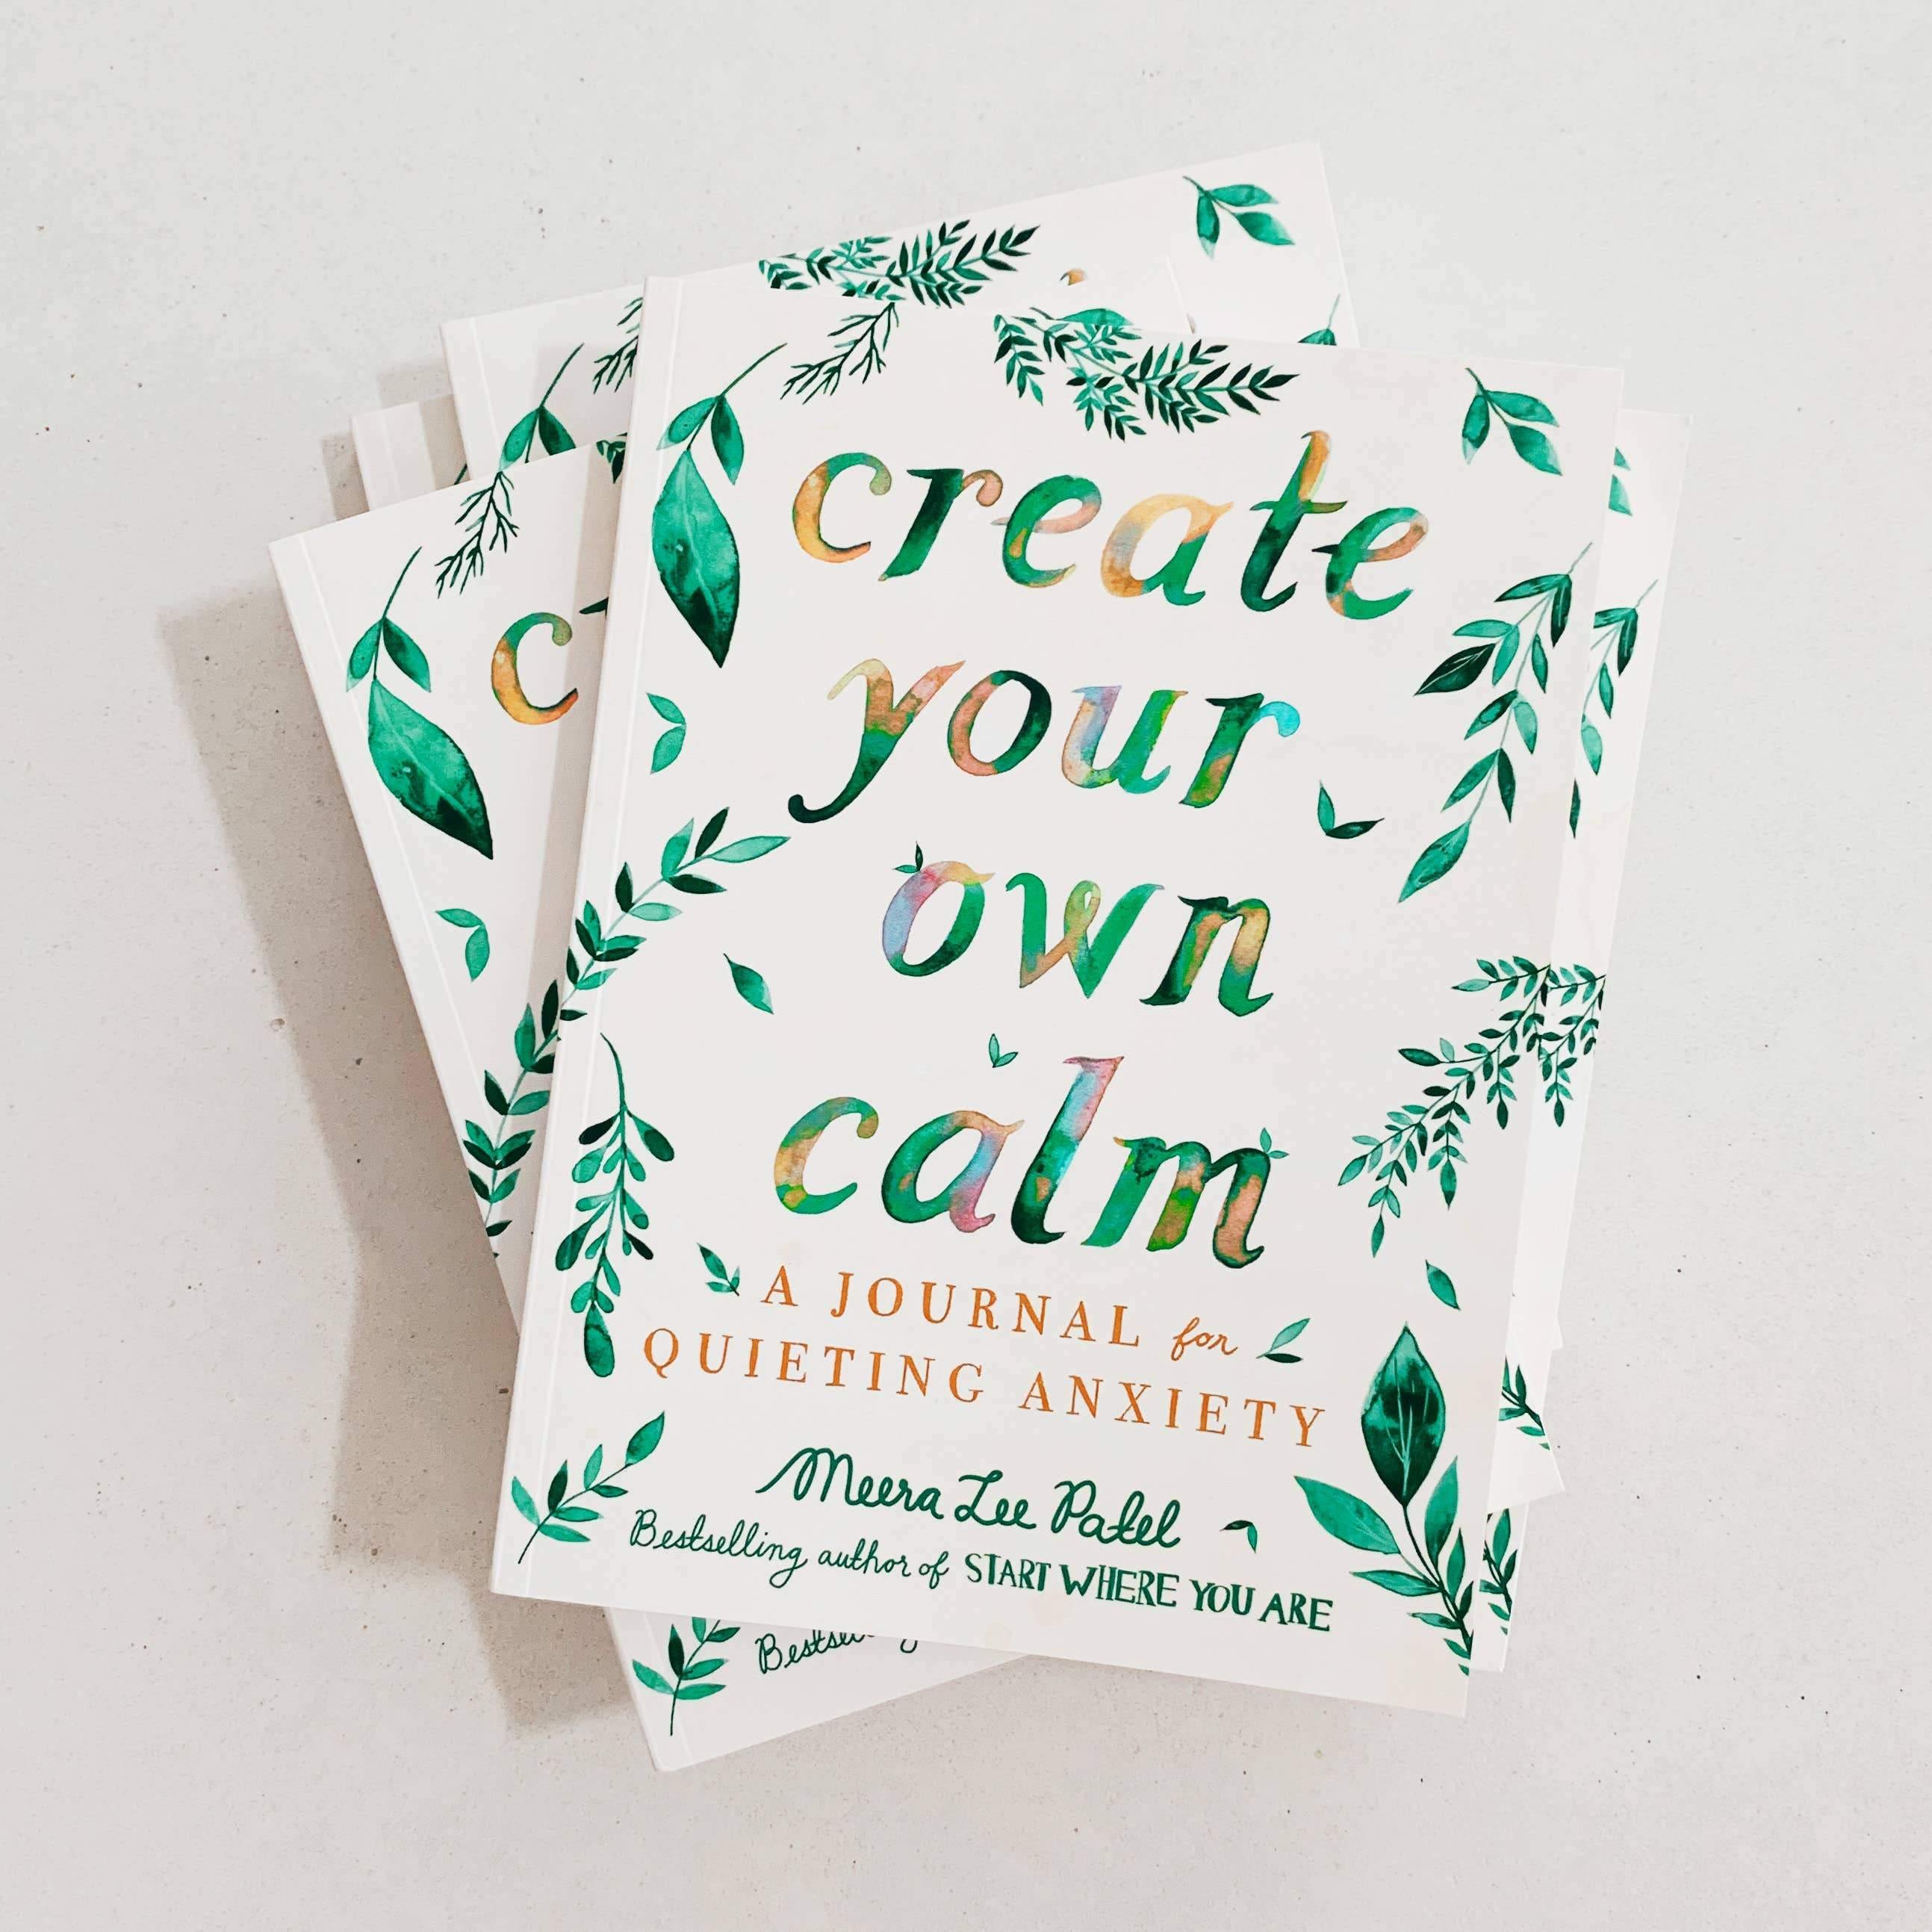 Create Your Own Calm: A Journal for Quieting Anxiety - DIGS